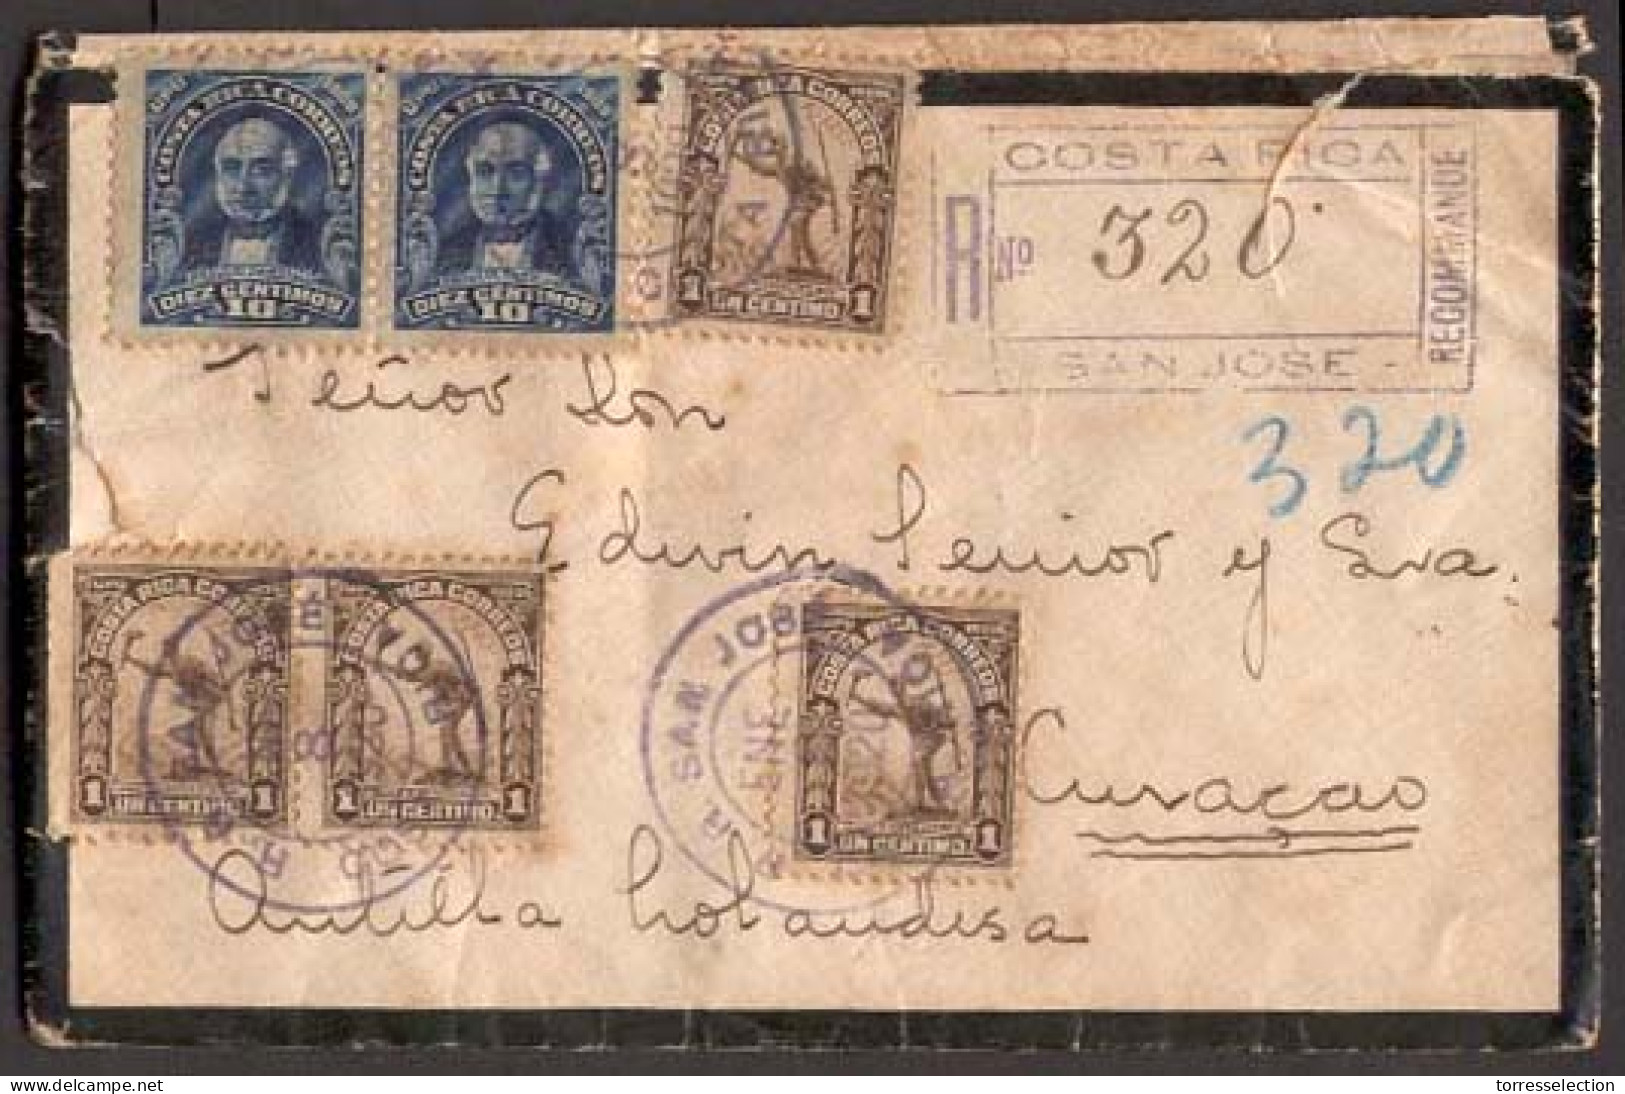 COSTA RICA. 1920 (Jan. 8). COSTA RICA - CURACAO - PANAMA. San Jose To Curacao. Registered Envelope Franked 1c Brown (x4) - Costa Rica